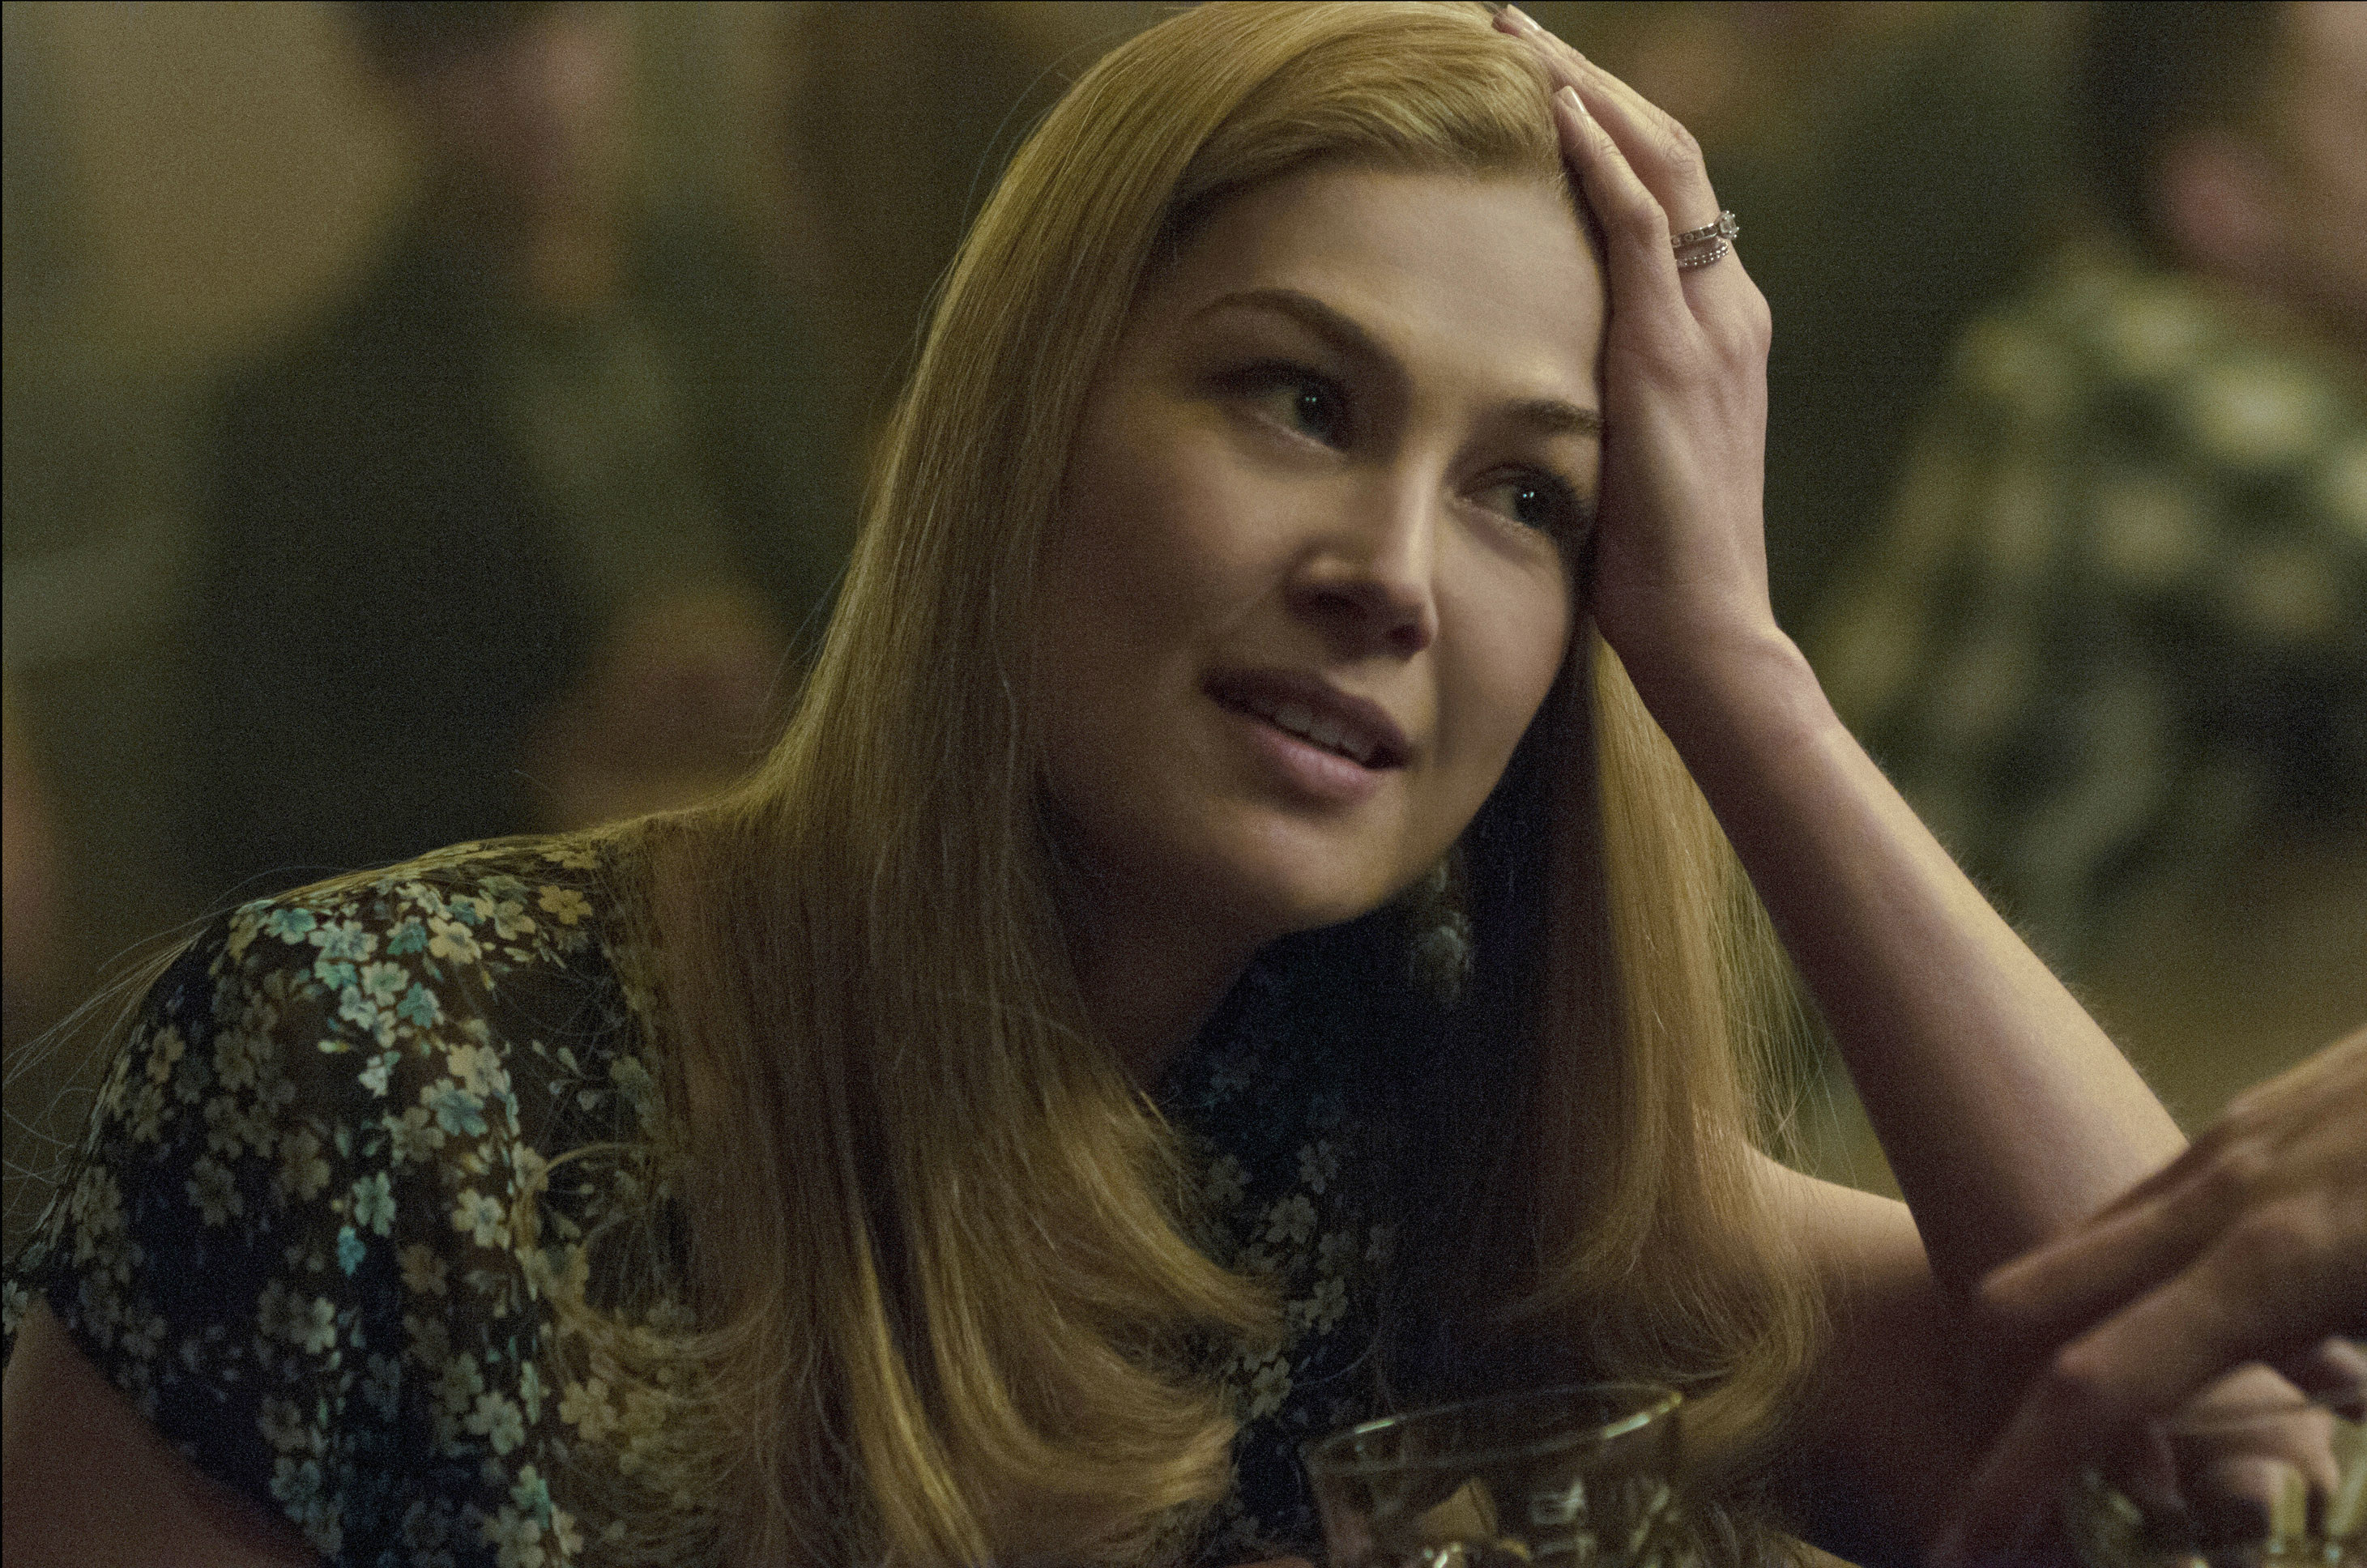 Rosamund Pike puts her hand on her head